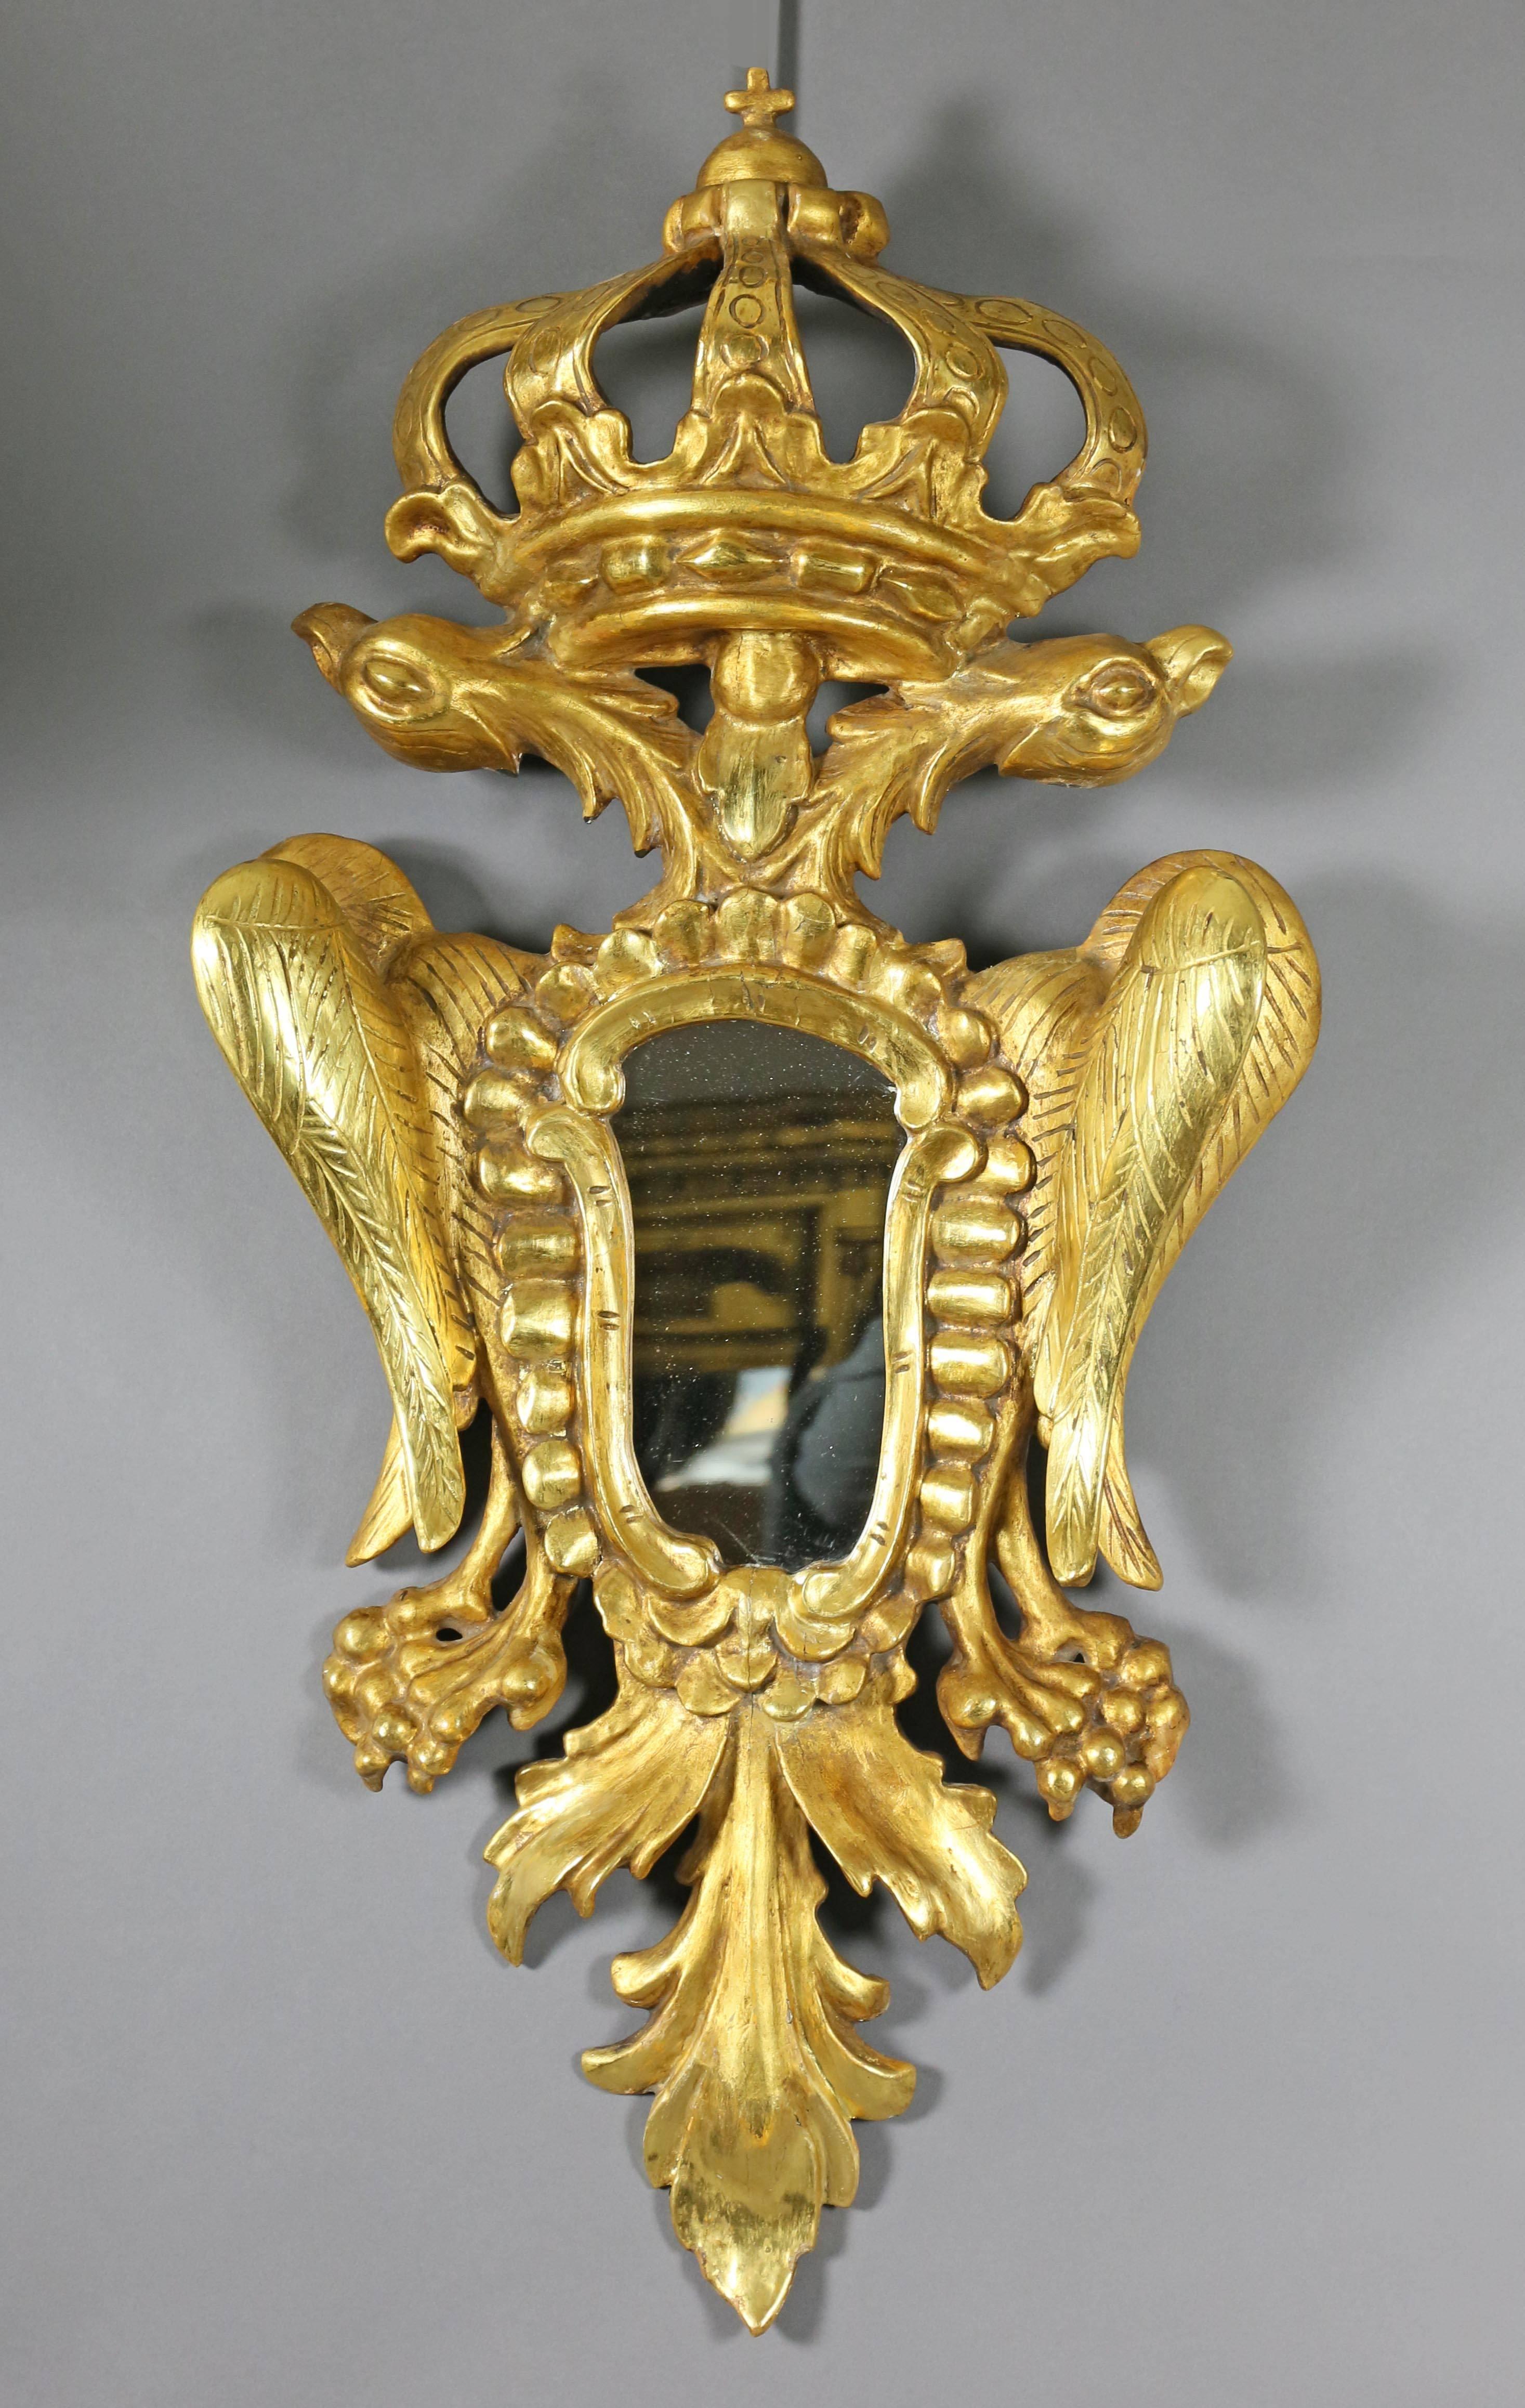 Each depicting two eagles beneath a crown, possibly Austrian or Russian.